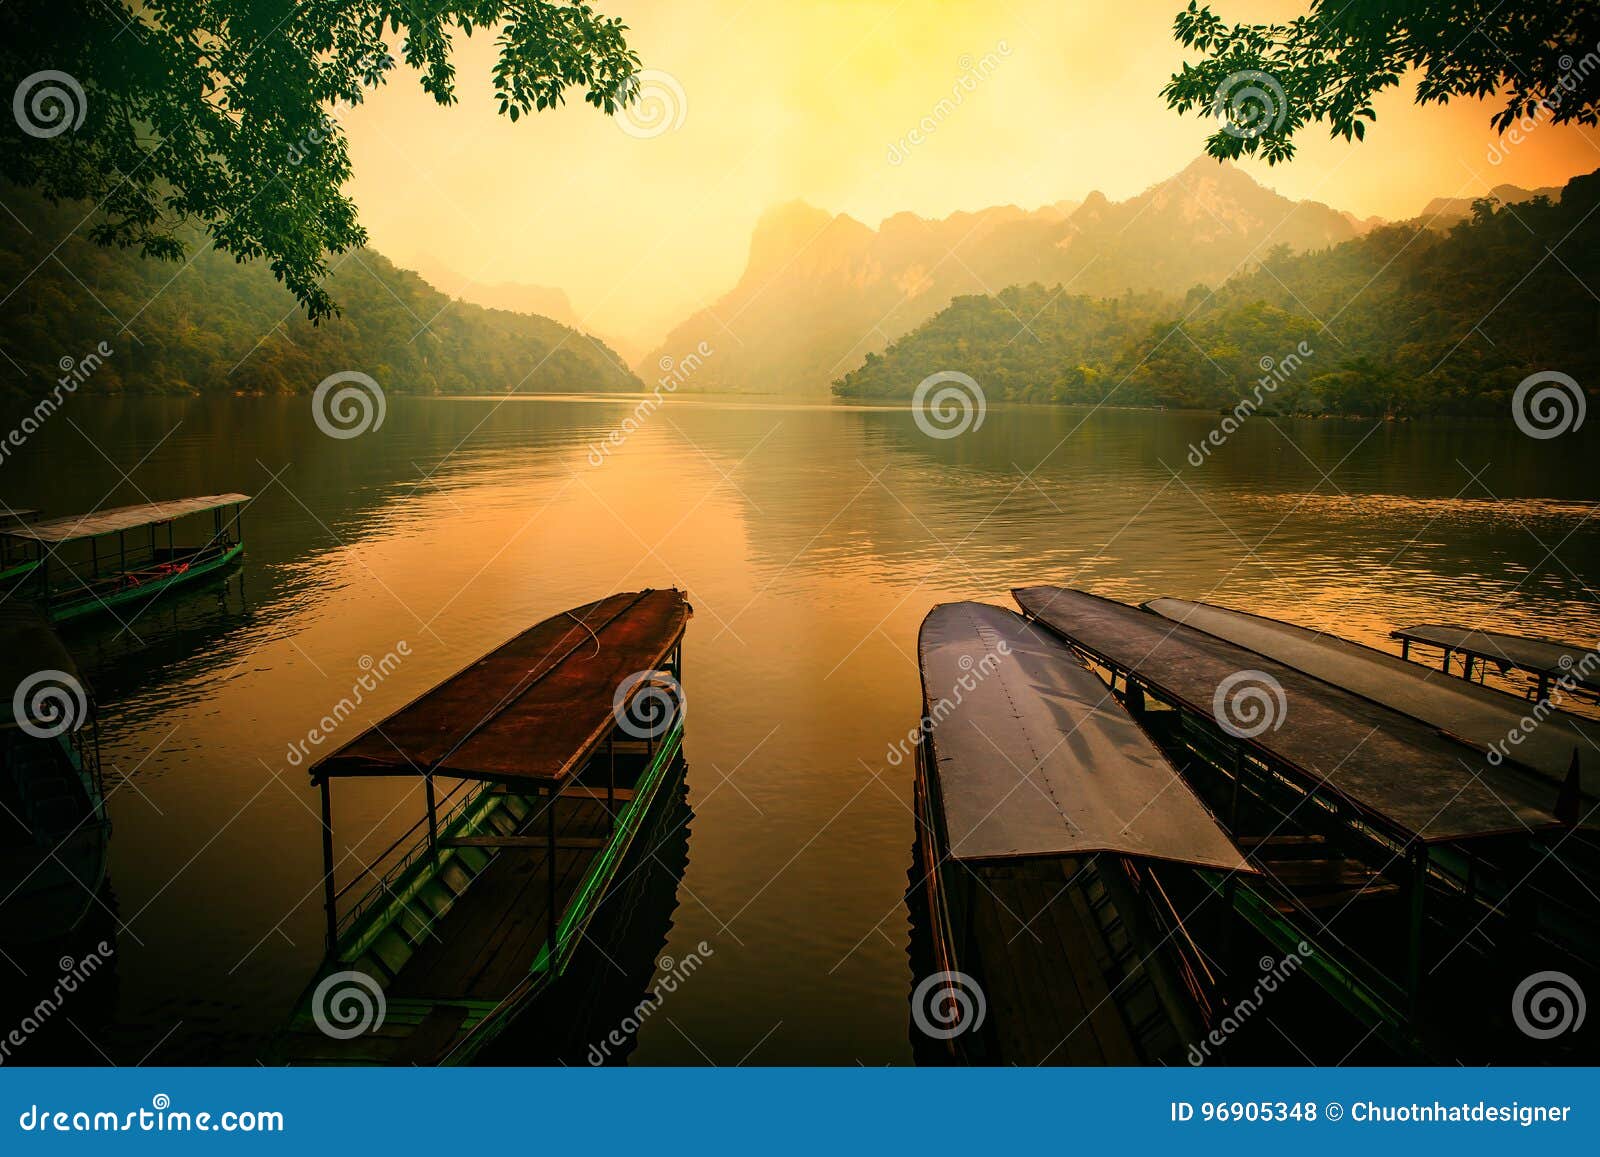 ba be lake, bac kan province, vietnam - april 4, 2017 : tourists on the boat are going to enjoy and explore ba be lake.